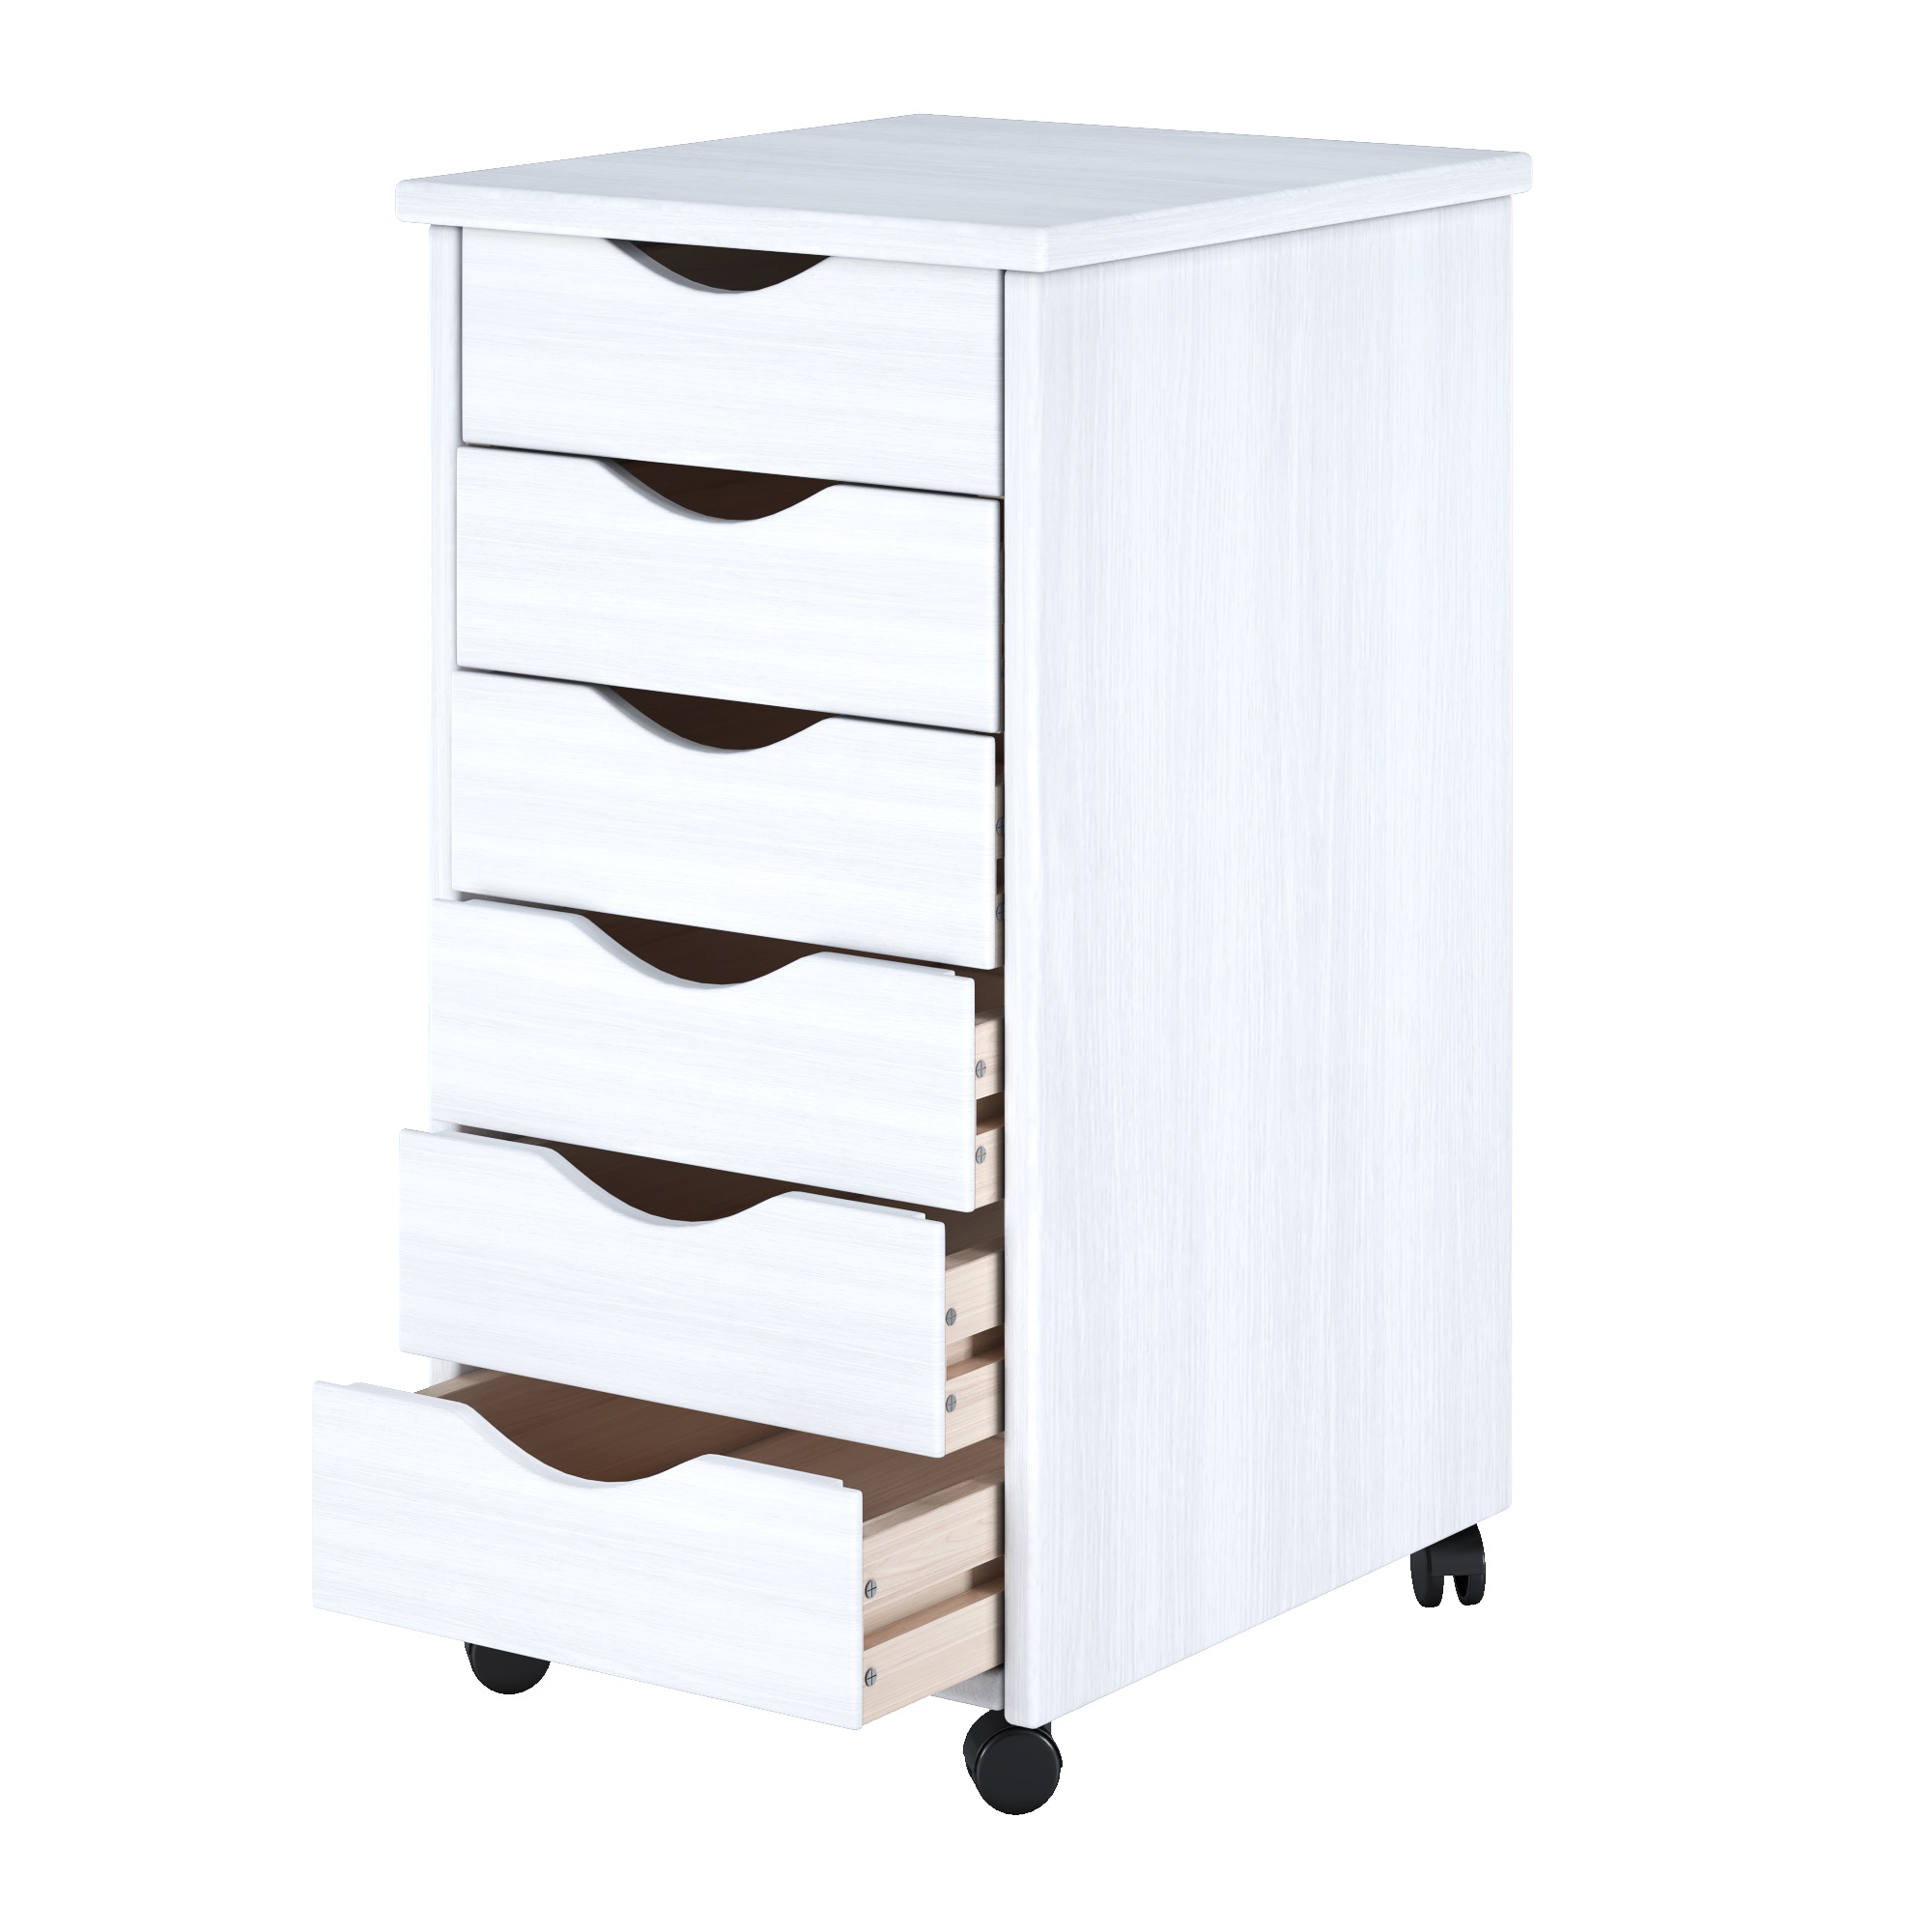 Adeptus Original Roll Cart, Solid Wood, 6 Drawer Roll Cart, White  (13.4" L x 15.4" W x 25.4" H) - image 2 of 9